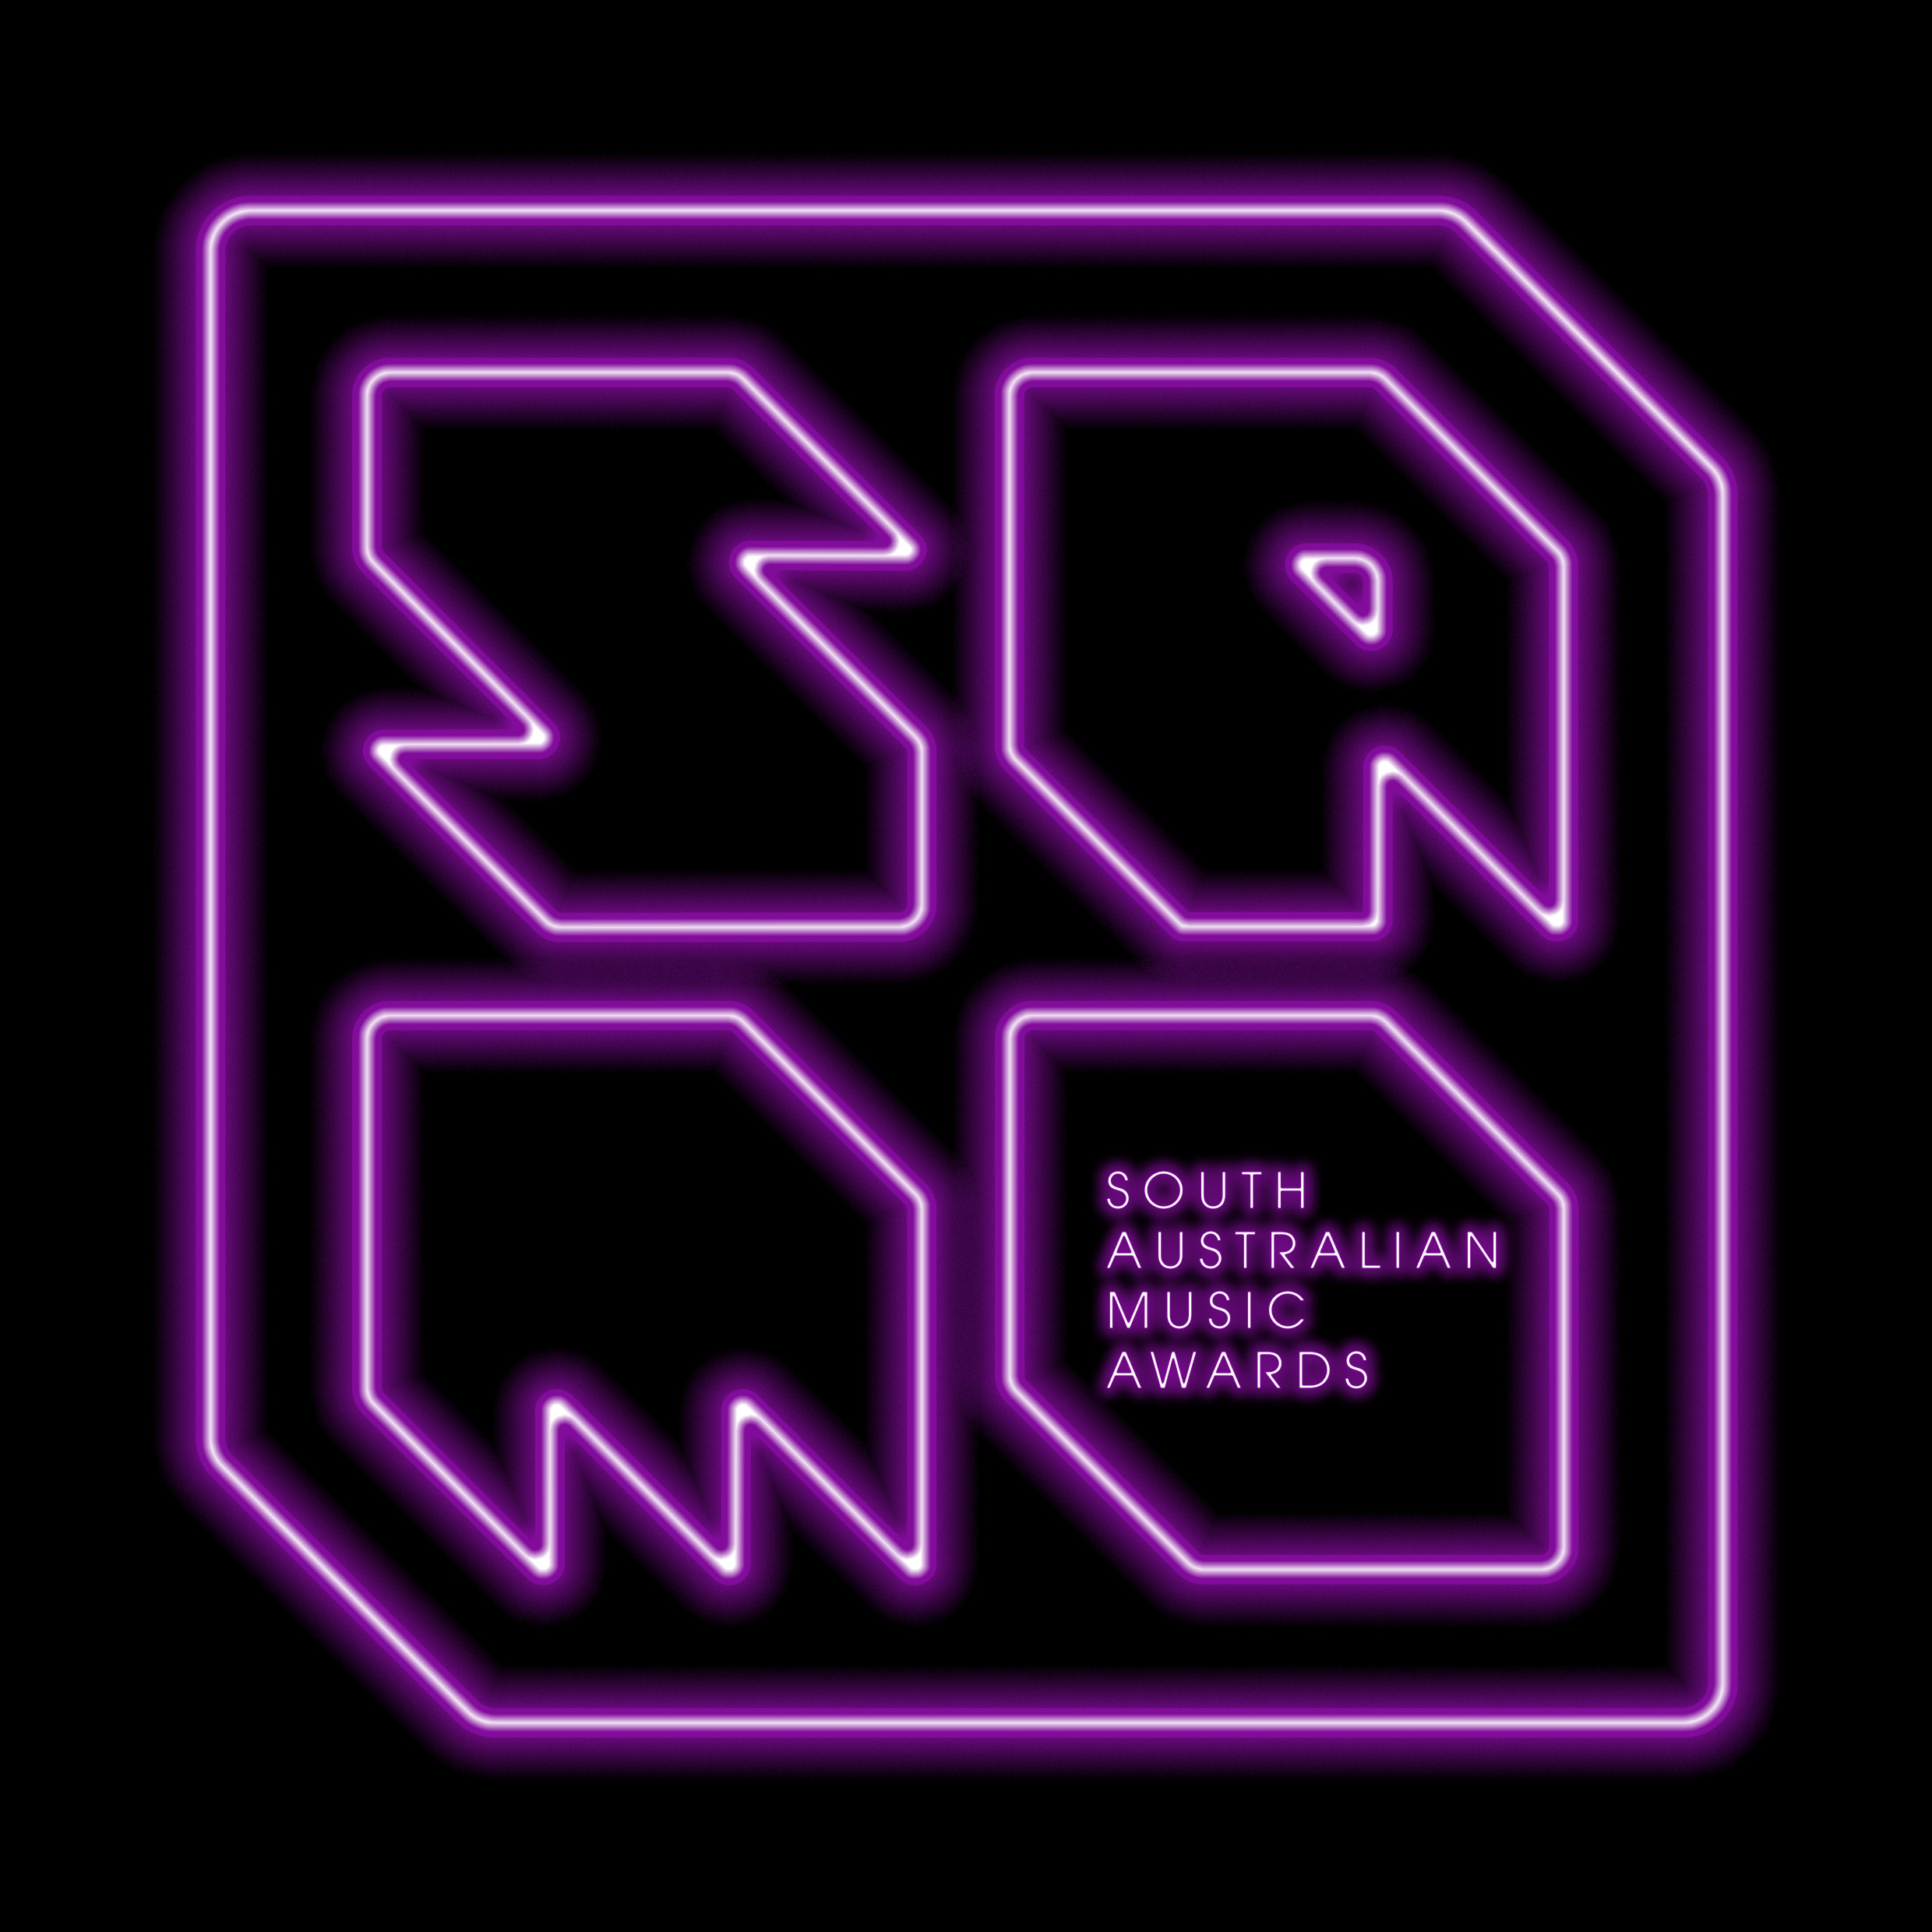 THE SOUTH AUSTRALIAN MUSIC AWARDS RETURNS FOR A TOUCHSTONE YEAR!